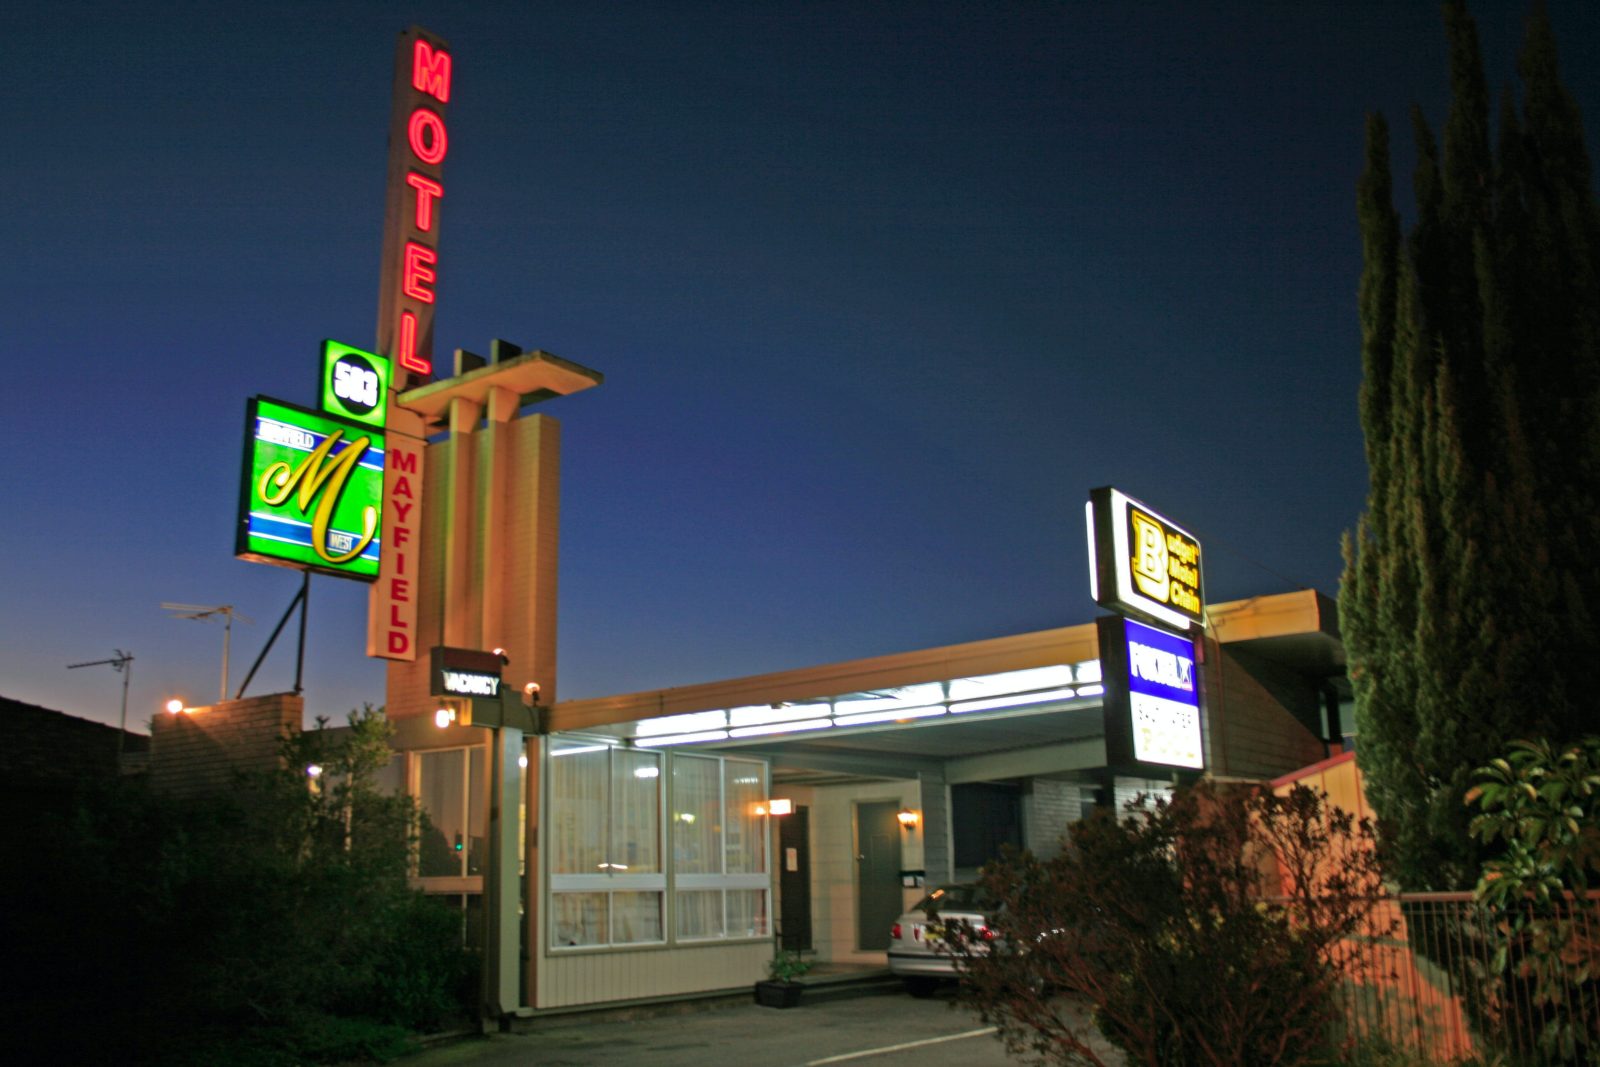 Mayfield Motel front entrance and classic neon signs at night